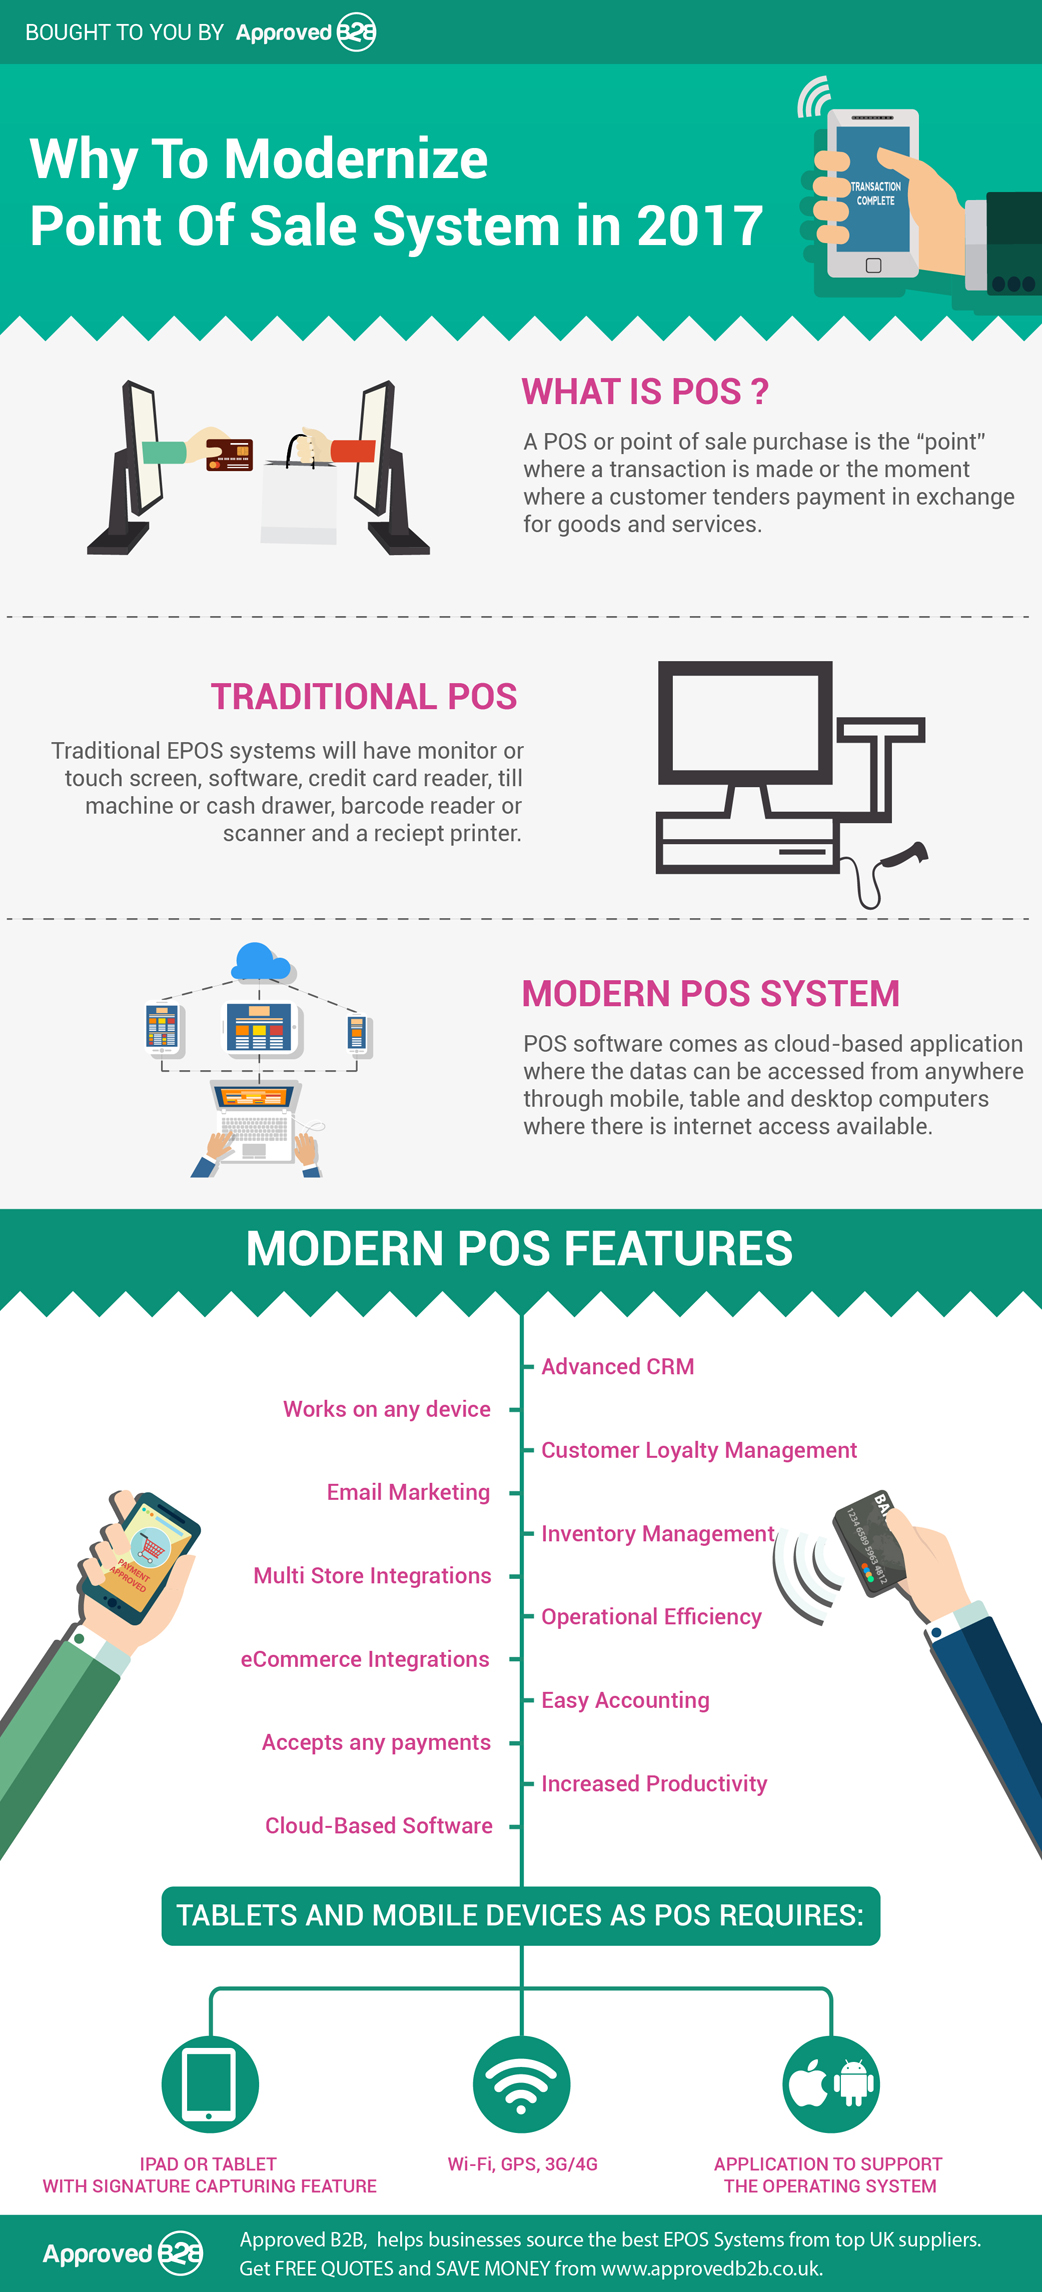 Modern Point of Sale System Trends 2017